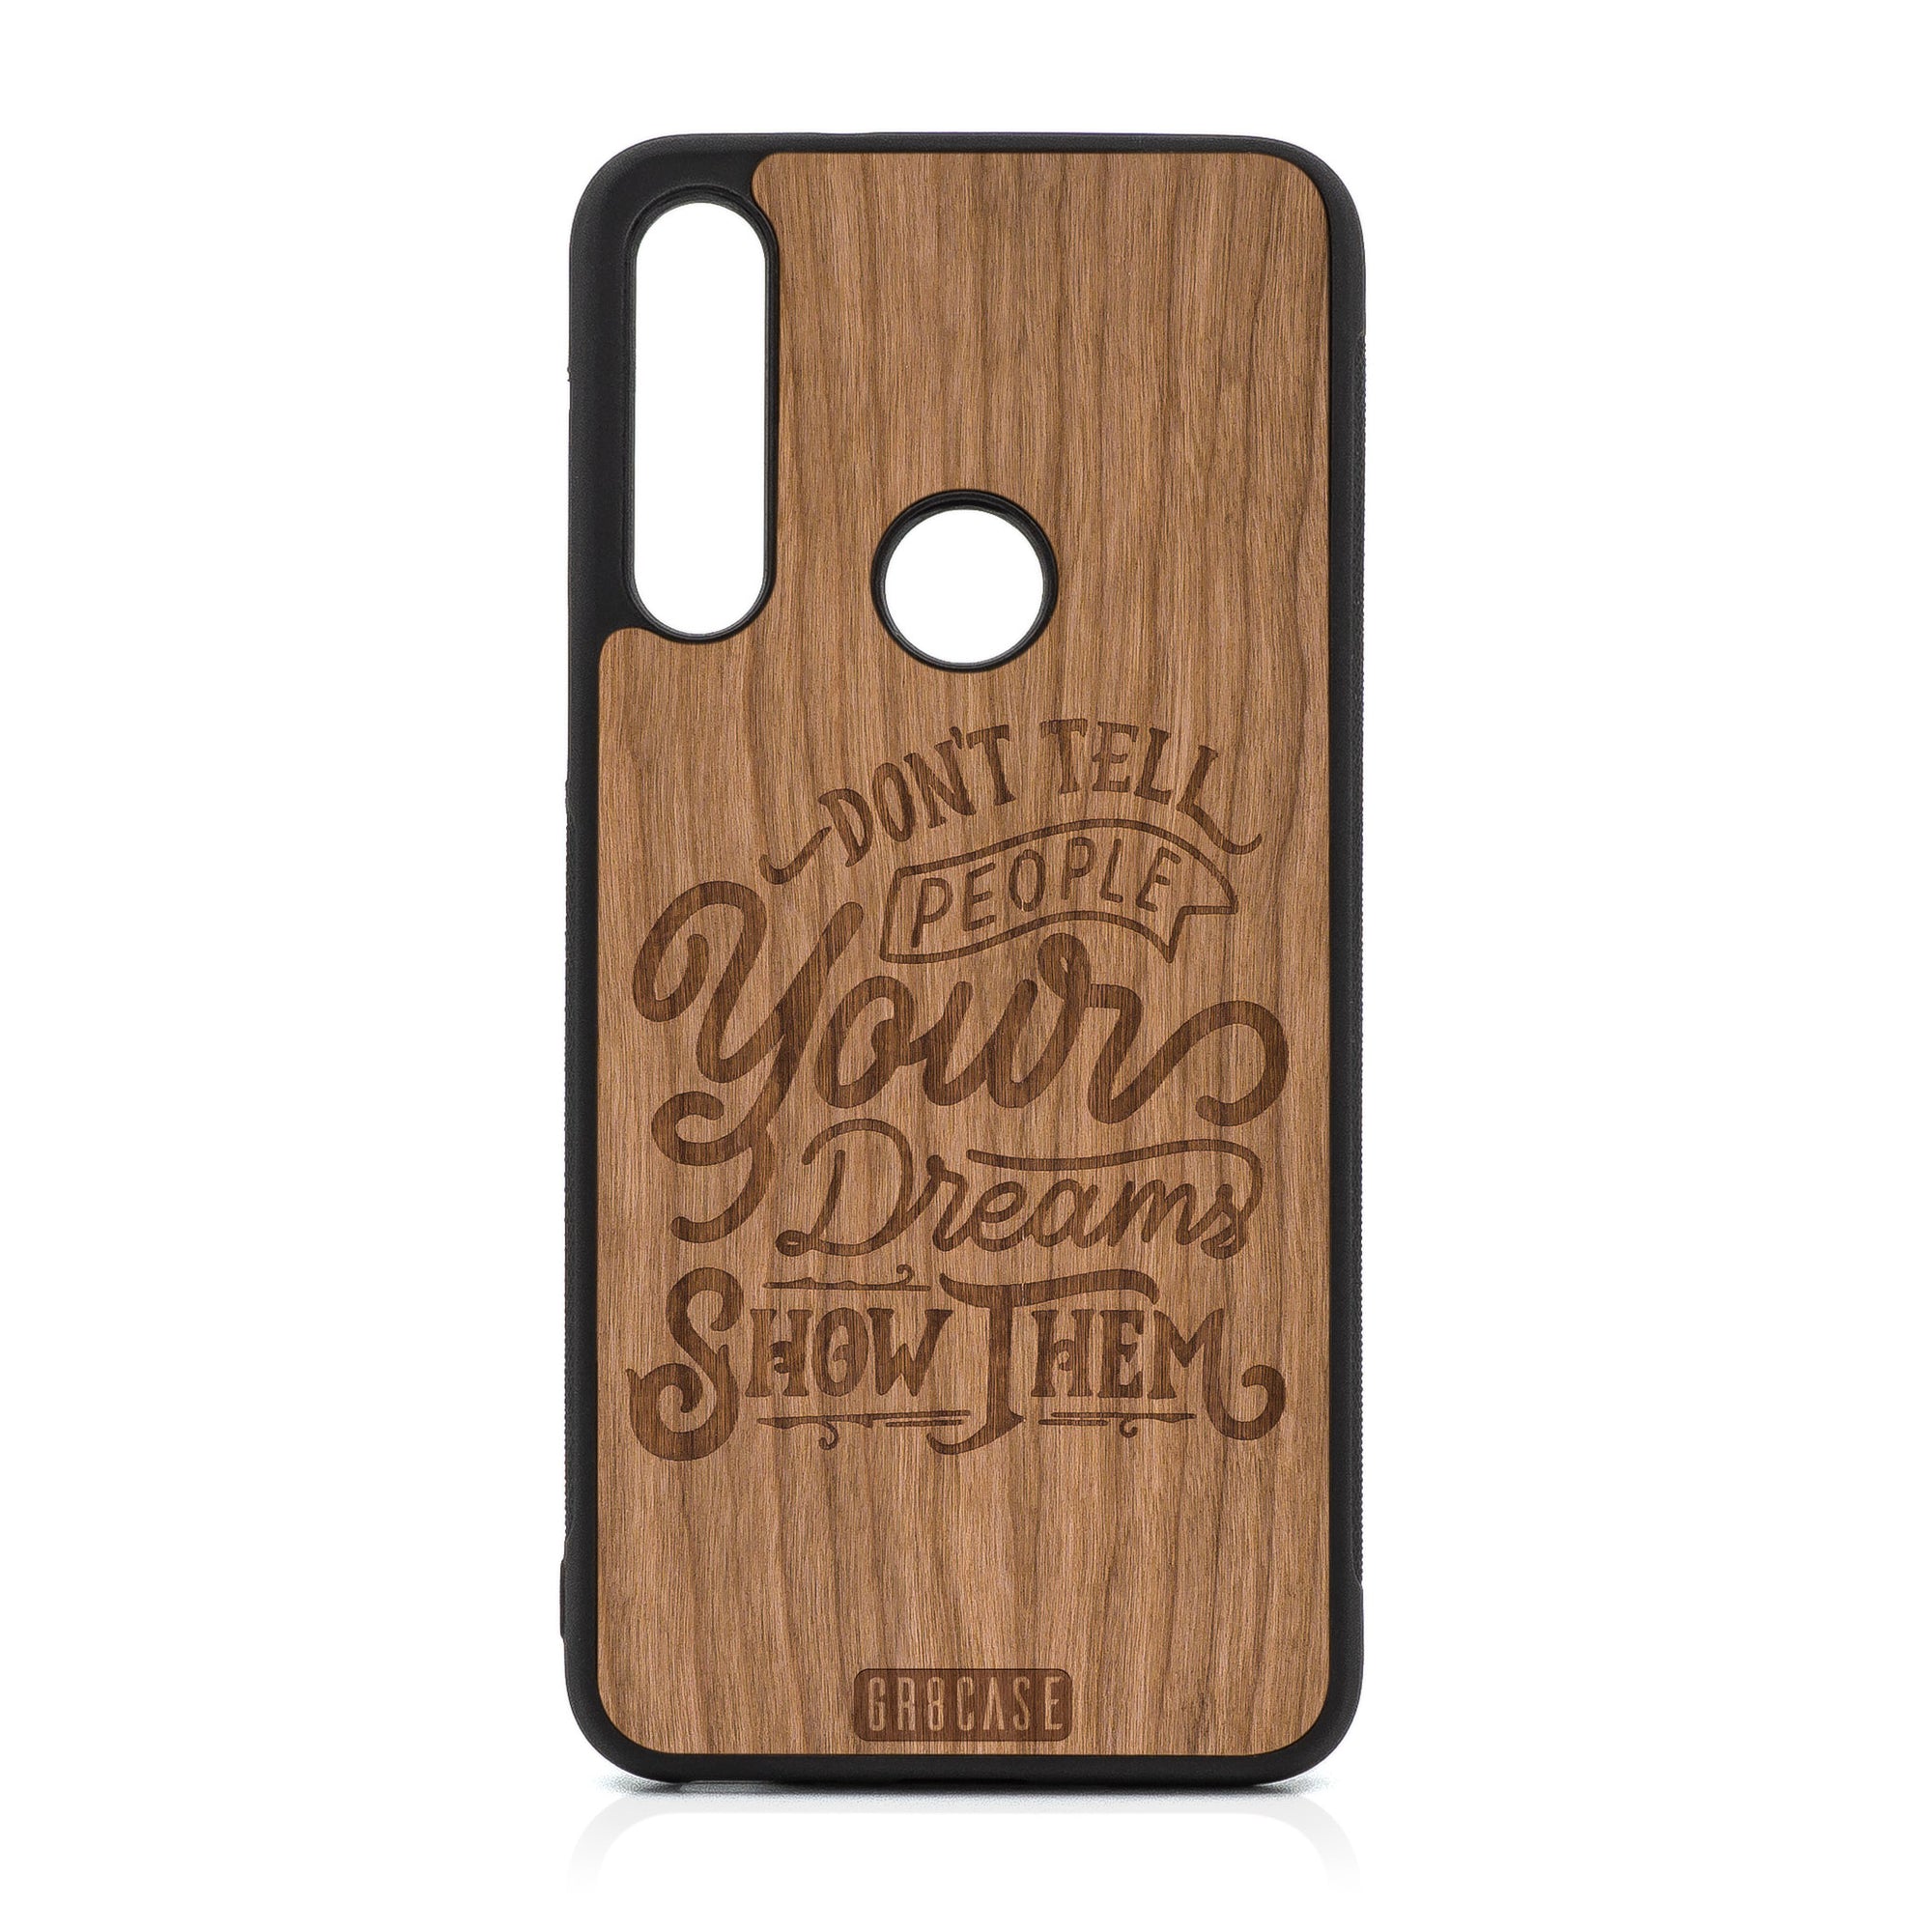 Don't Tell People Your Dreams Show Them Design Wood Case For Moto G Fast